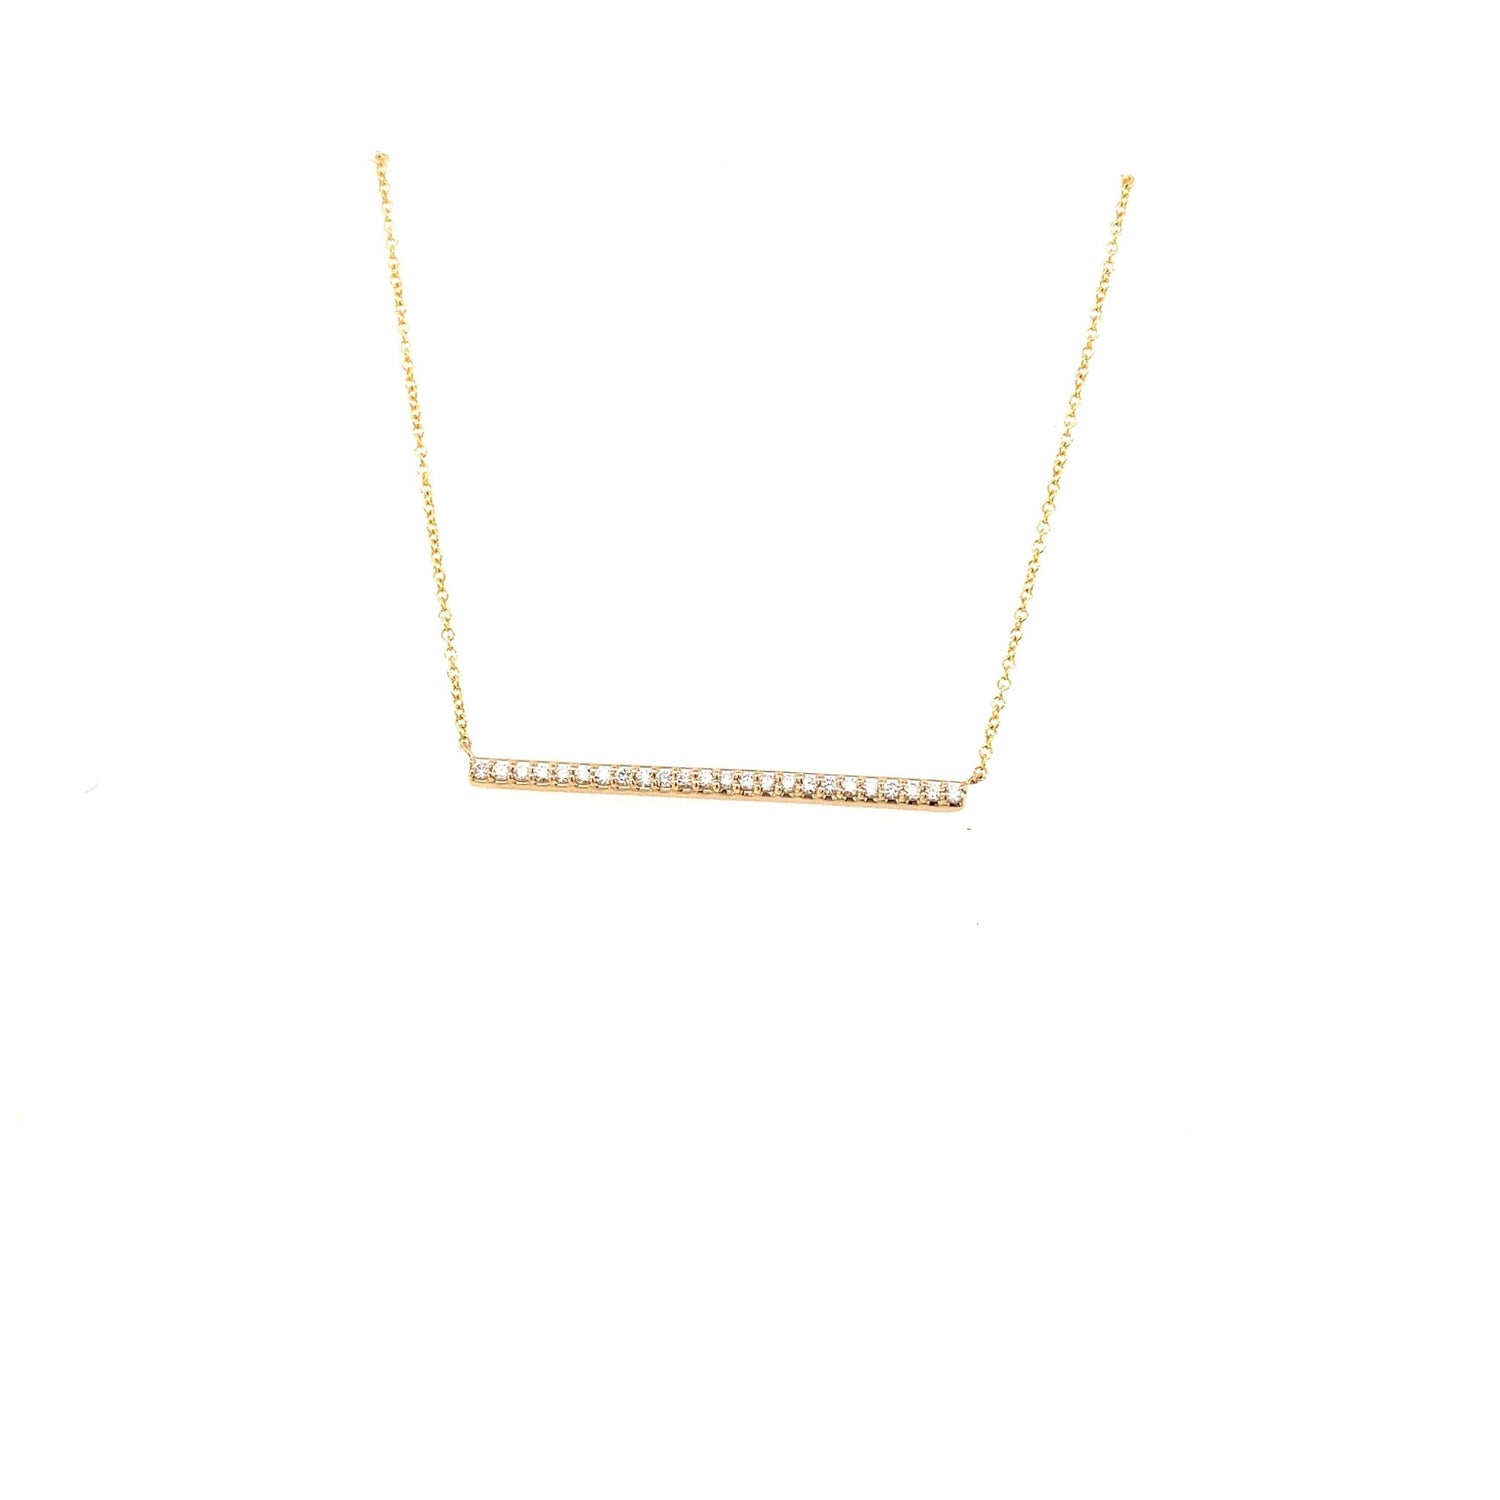 Necklace diamond trapeze bar 24=.24ct 14kt yellow gold - Gaines Jewelers